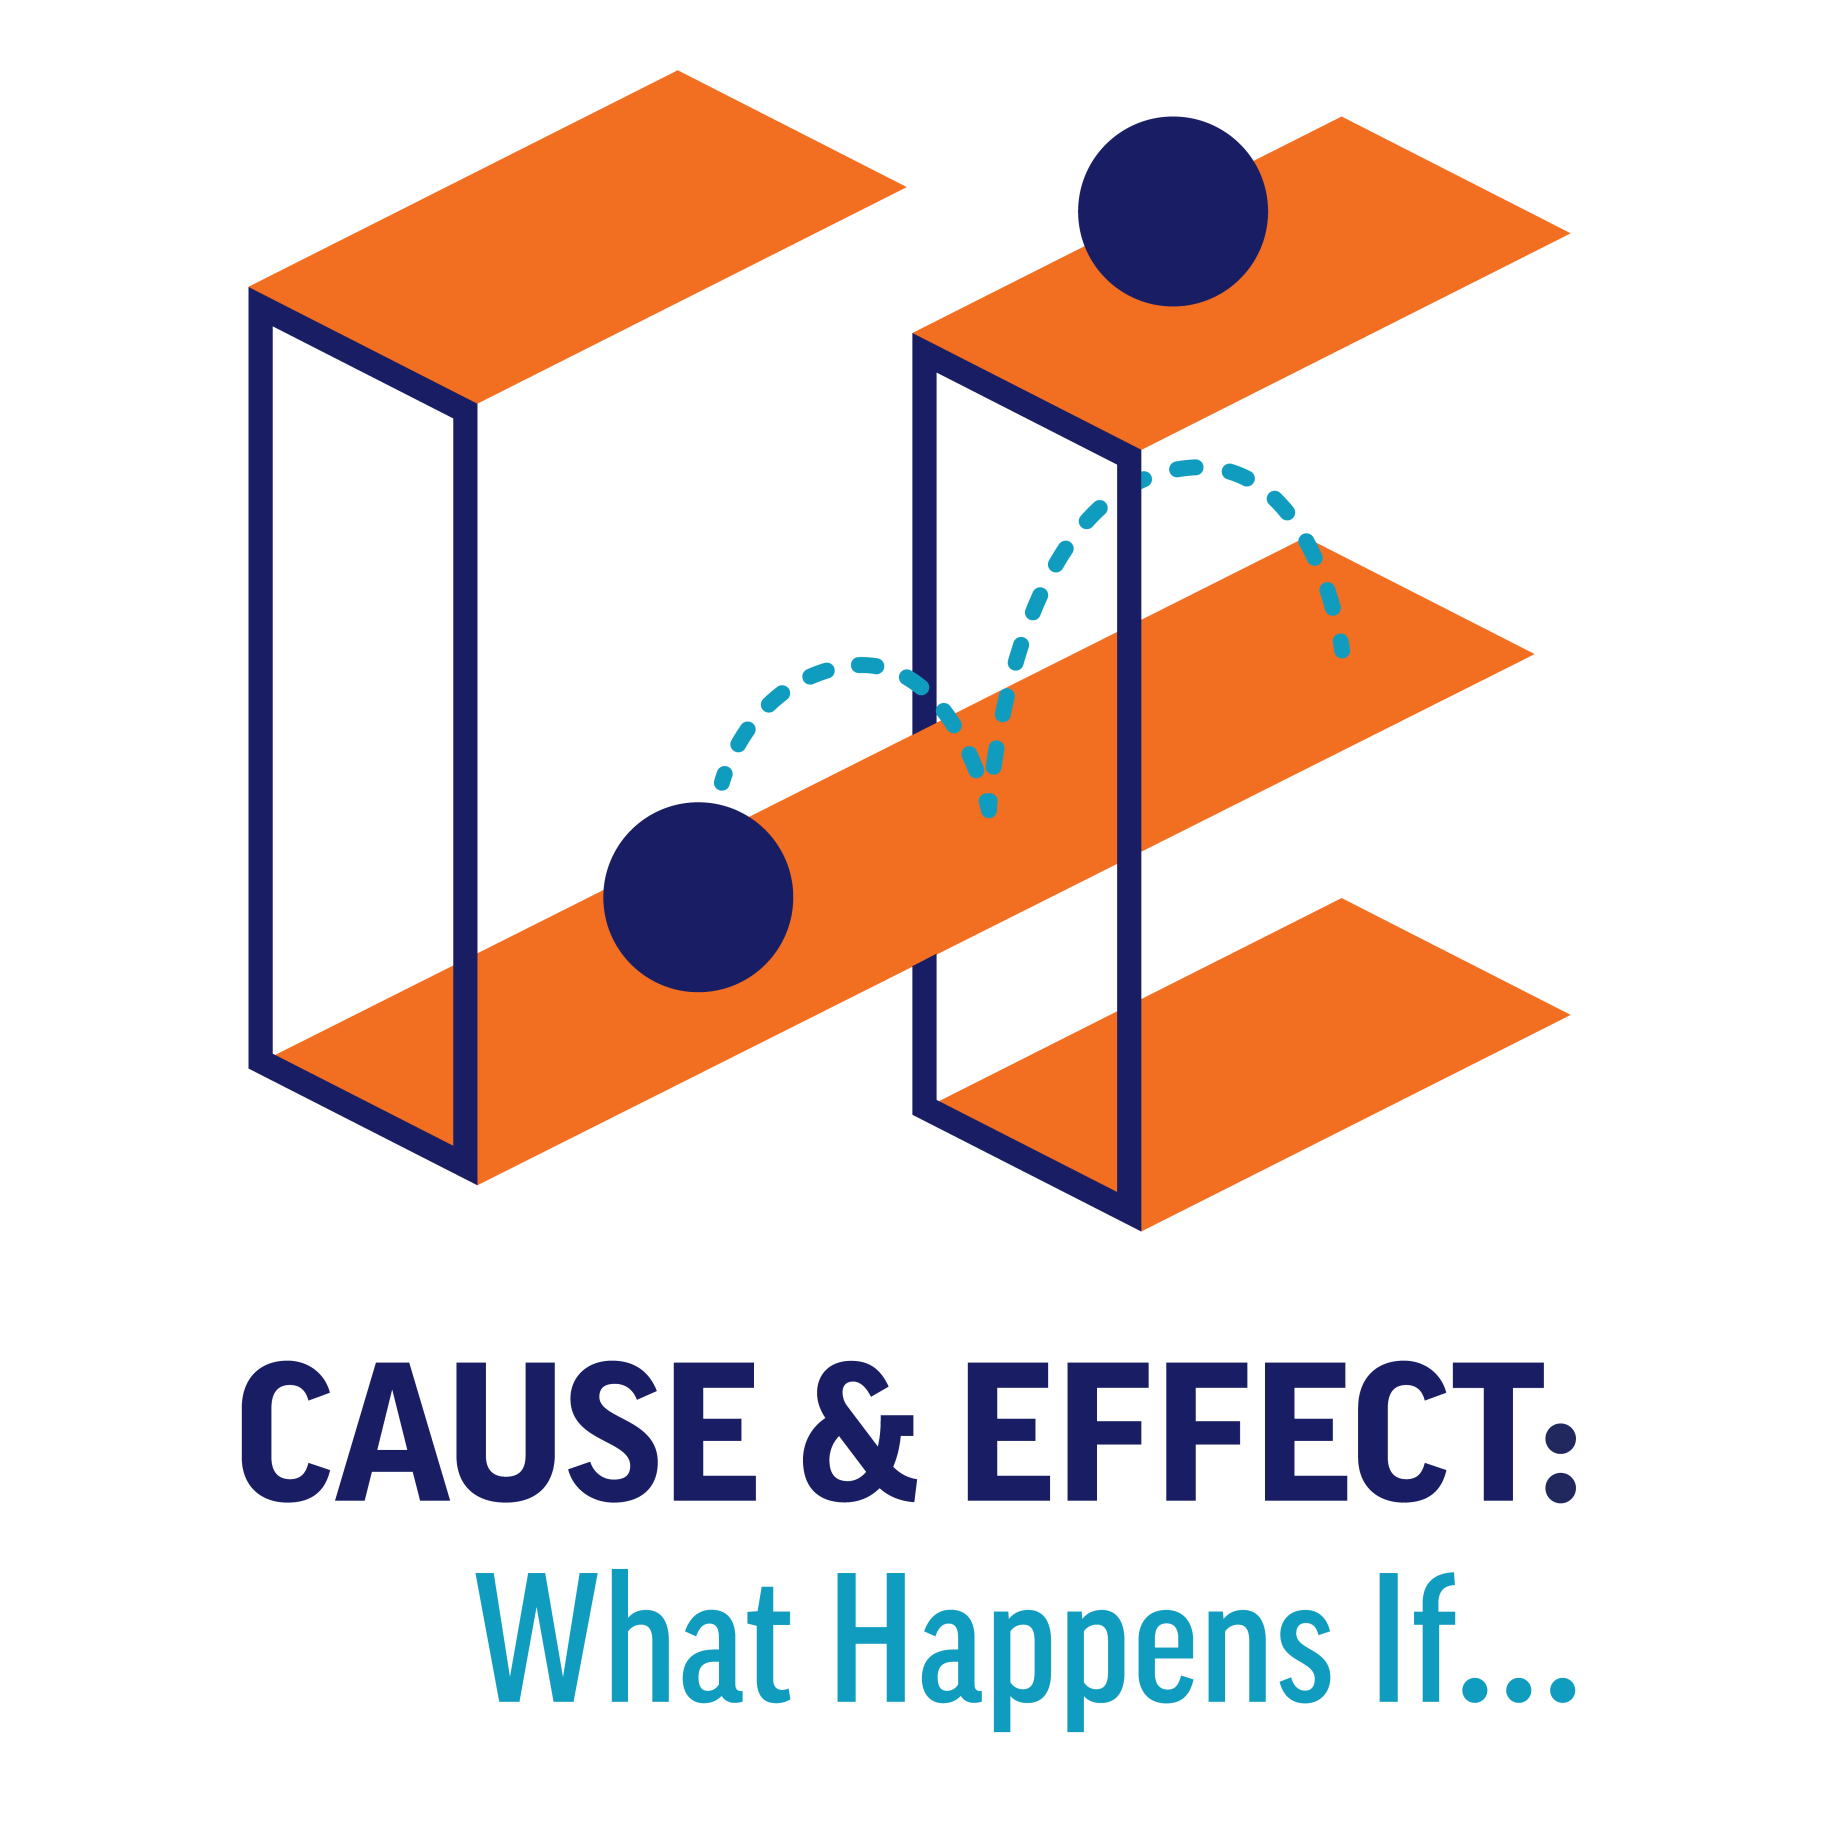 a graphic logo that says, "Cause & Effect: What Happens If..."